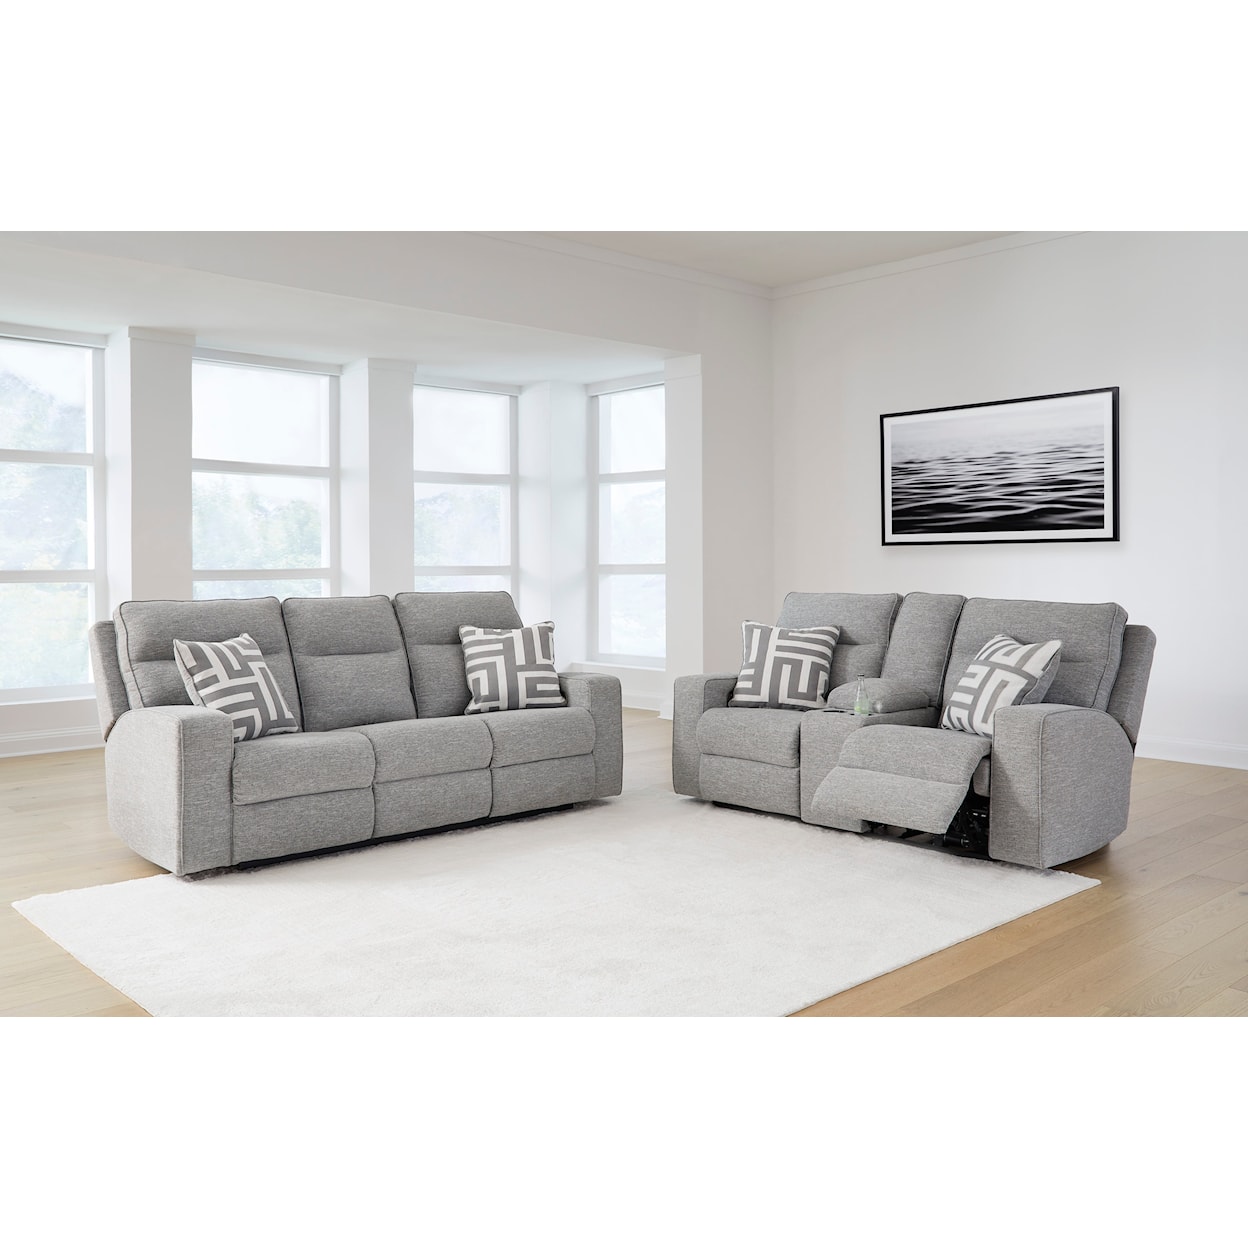 Signature Design by Ashley Biscoe Living Room Set